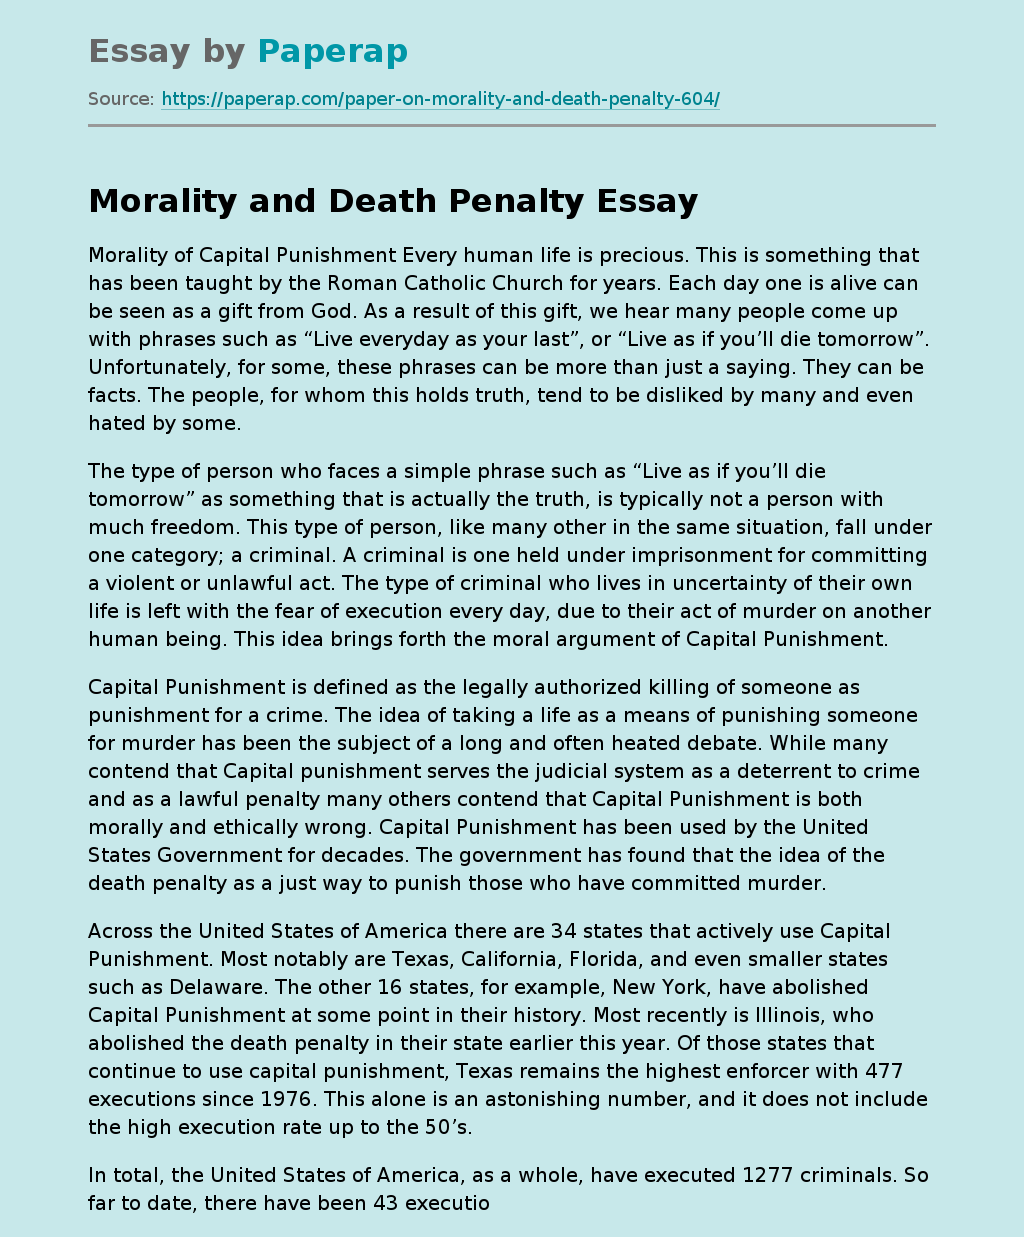 Morality and Death Penalty